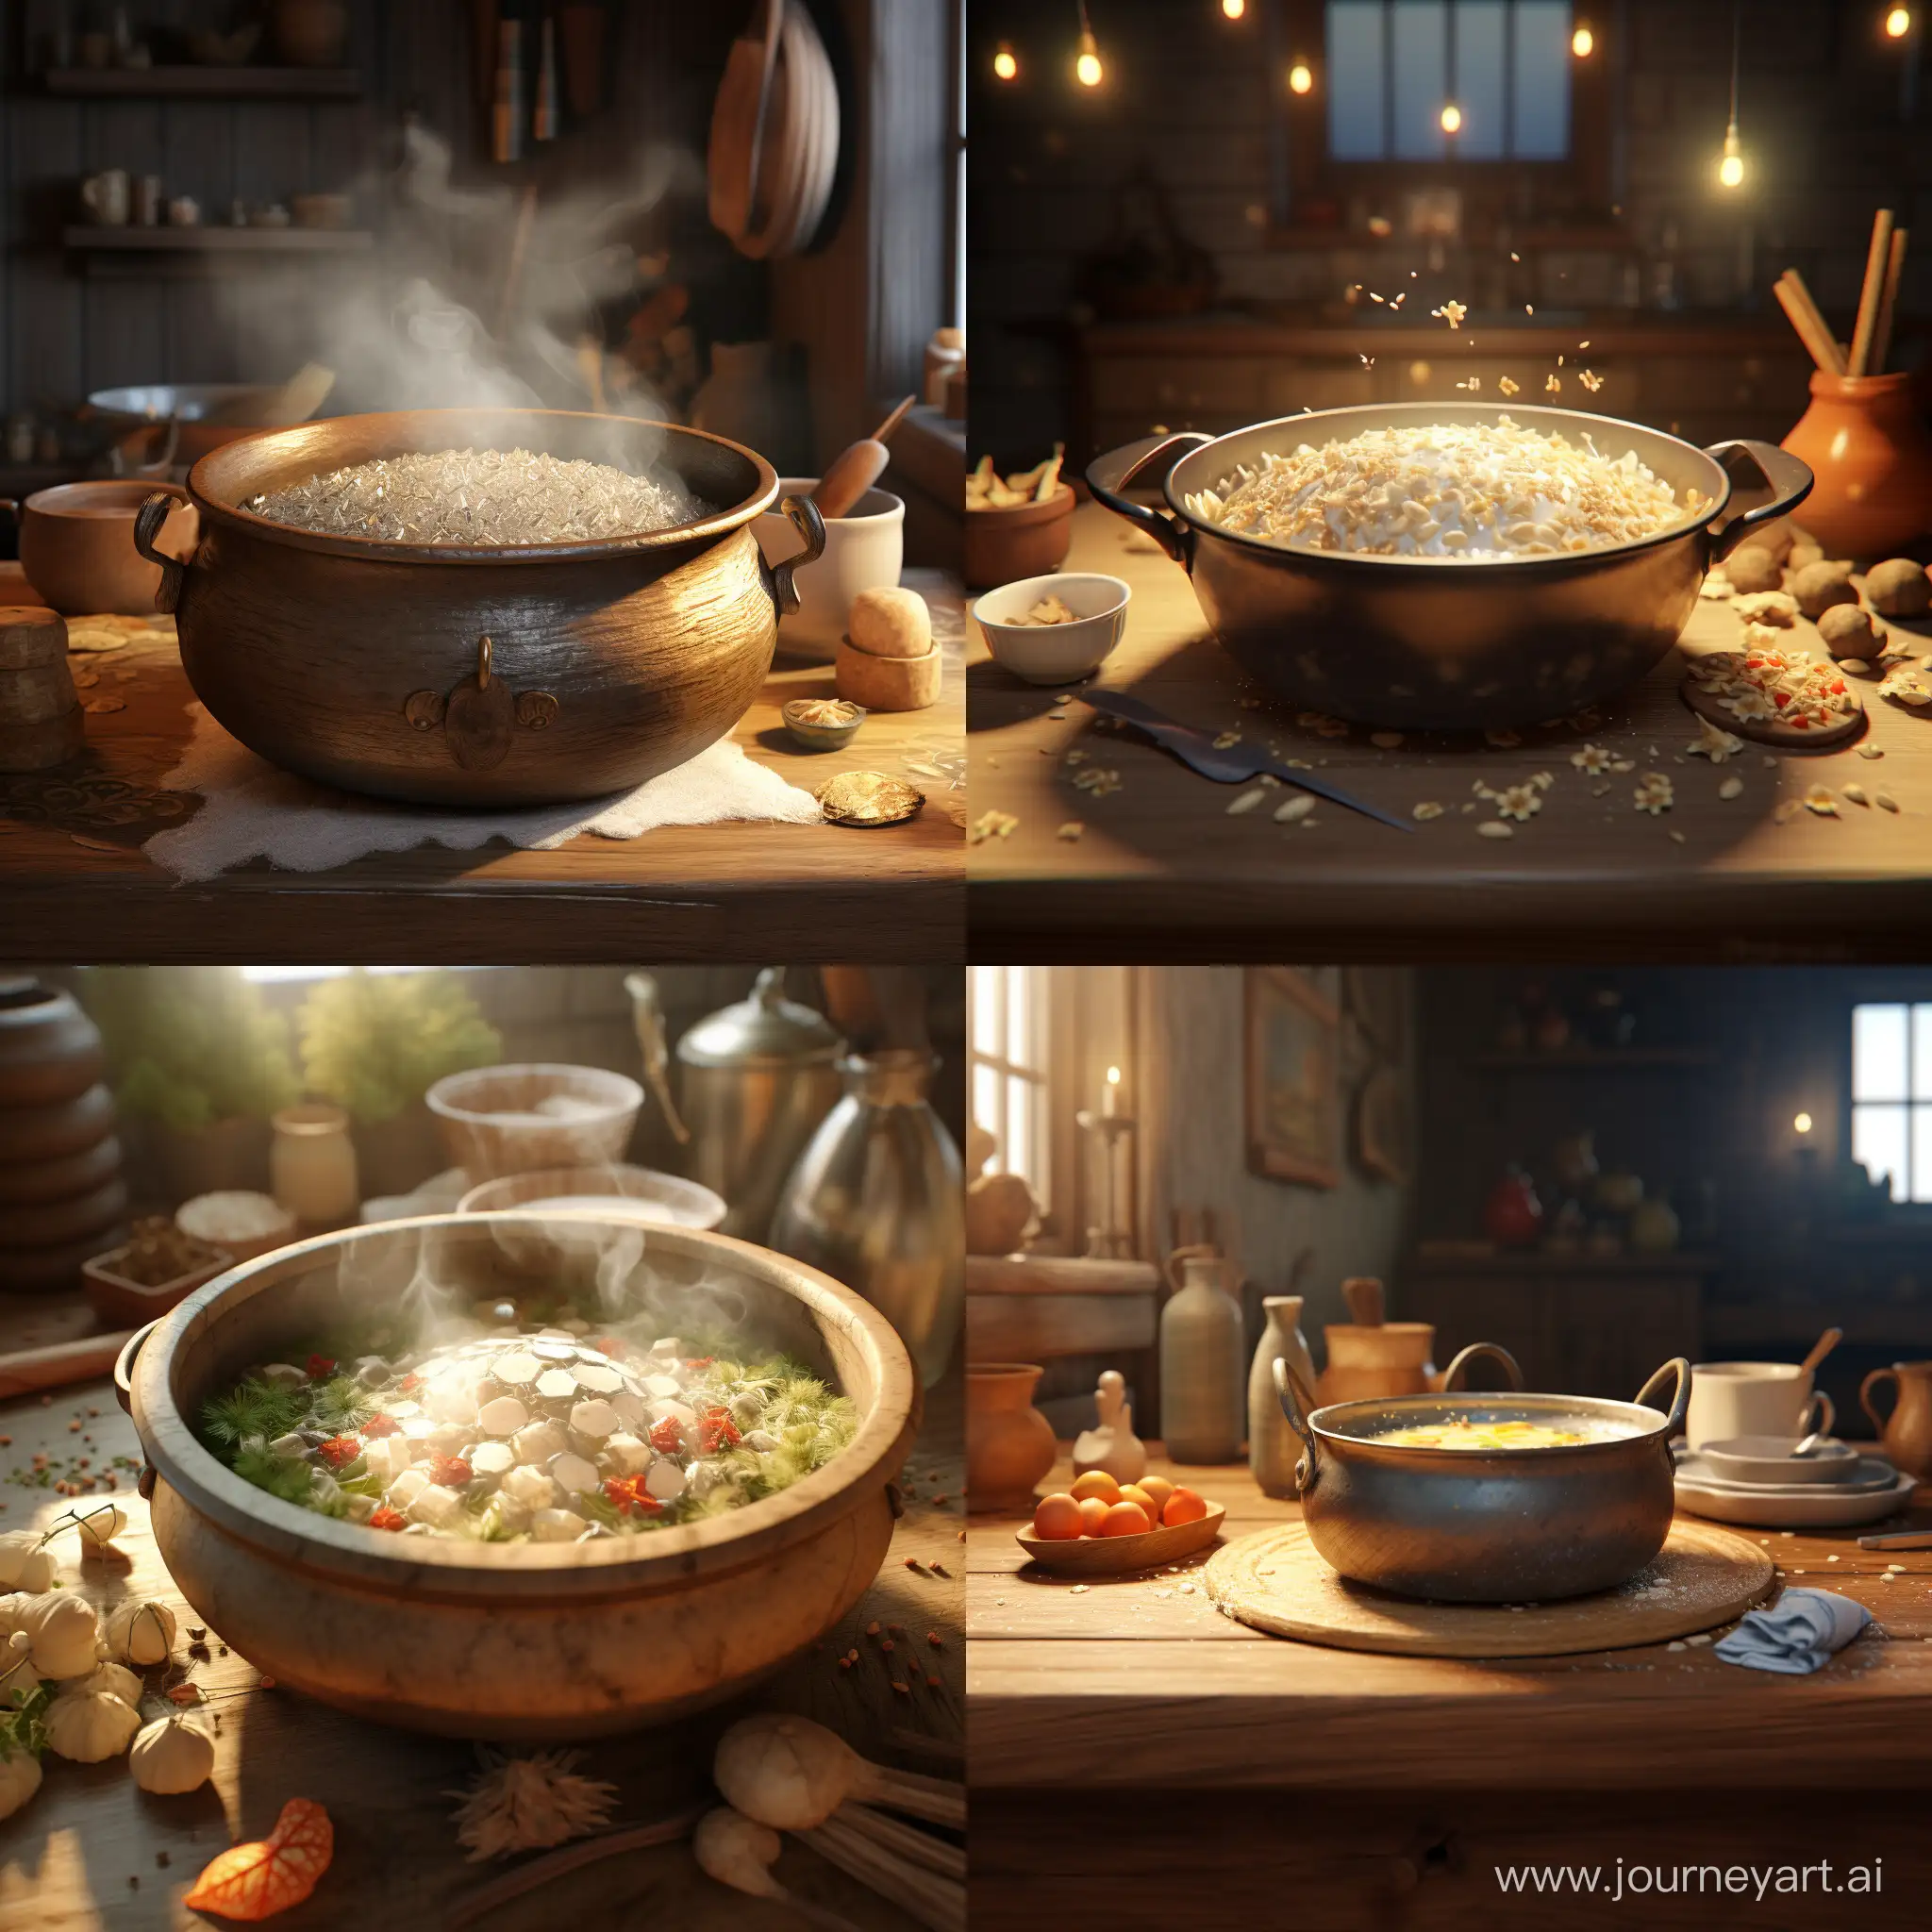 Steamy-Pot-of-Porridge-Wholesome-3D-Animation-Delights-Viewers